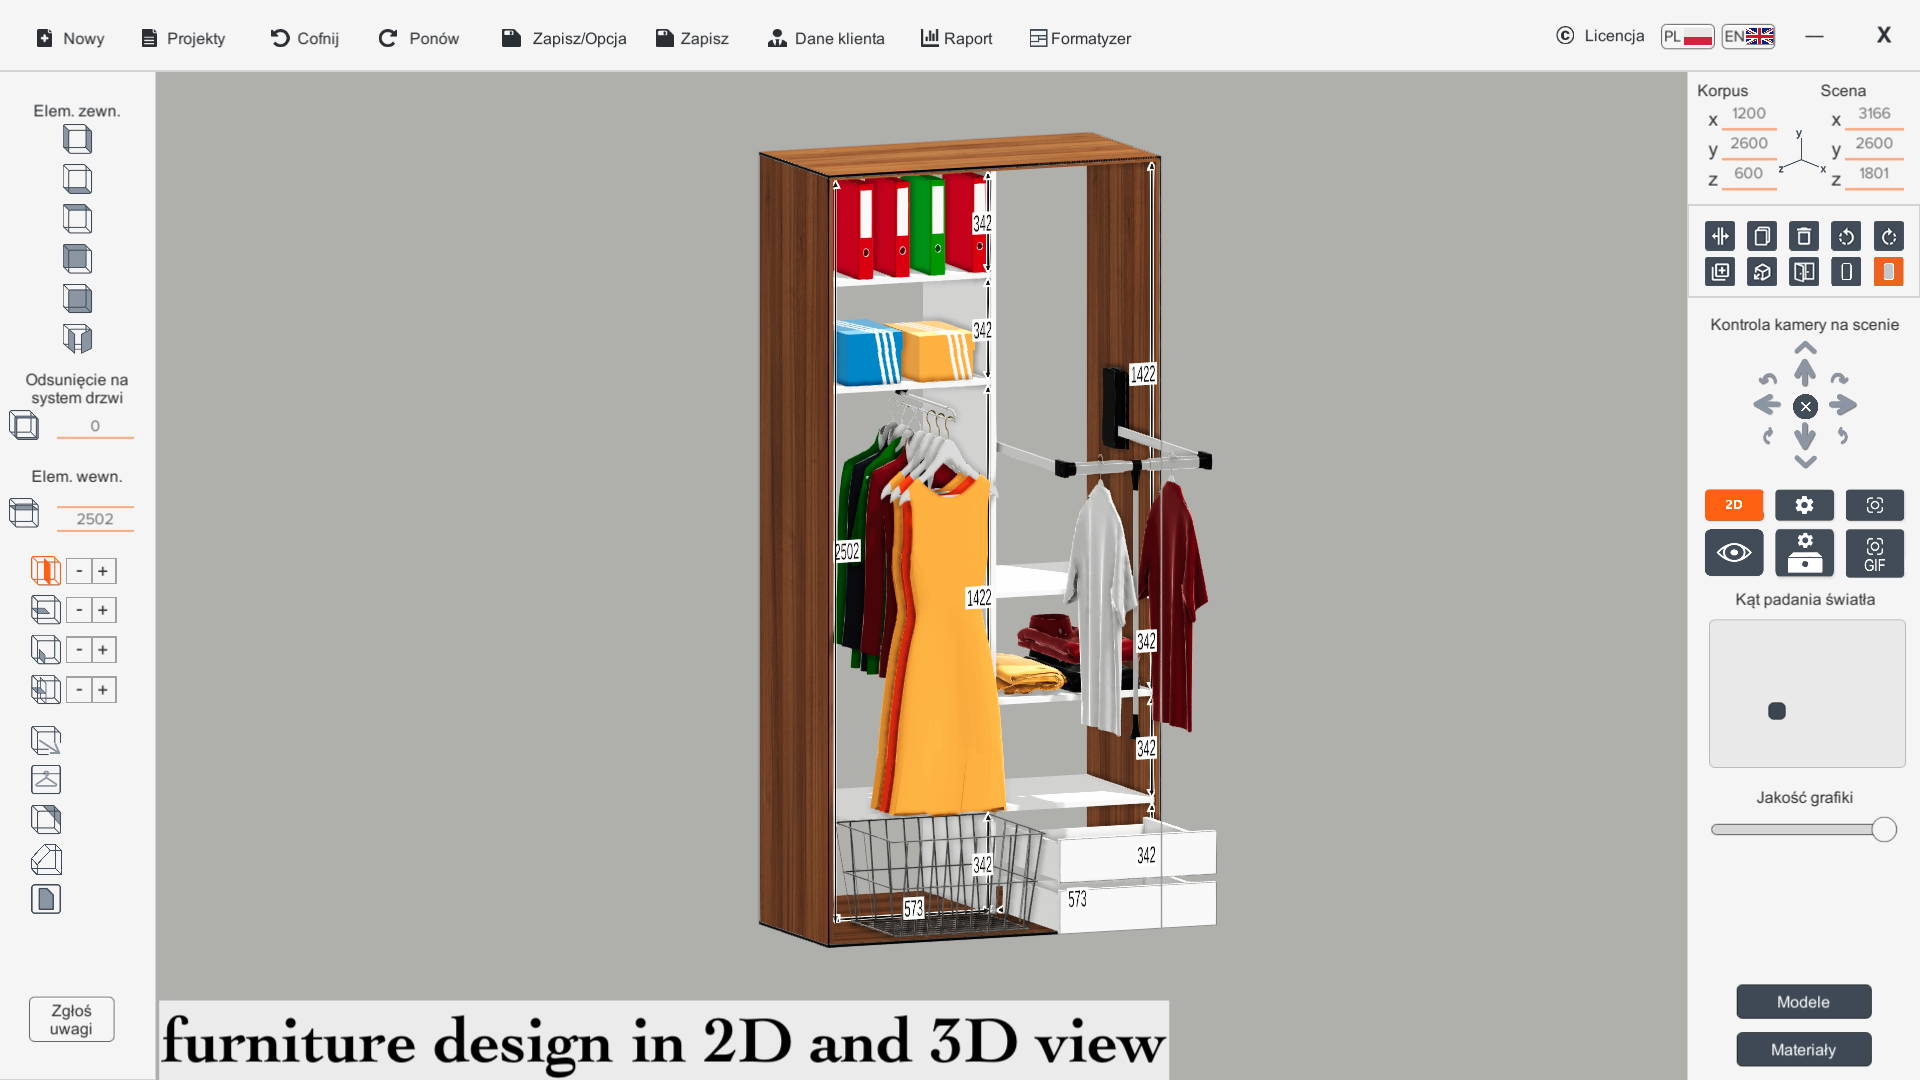 rotate the furniture in 2D view